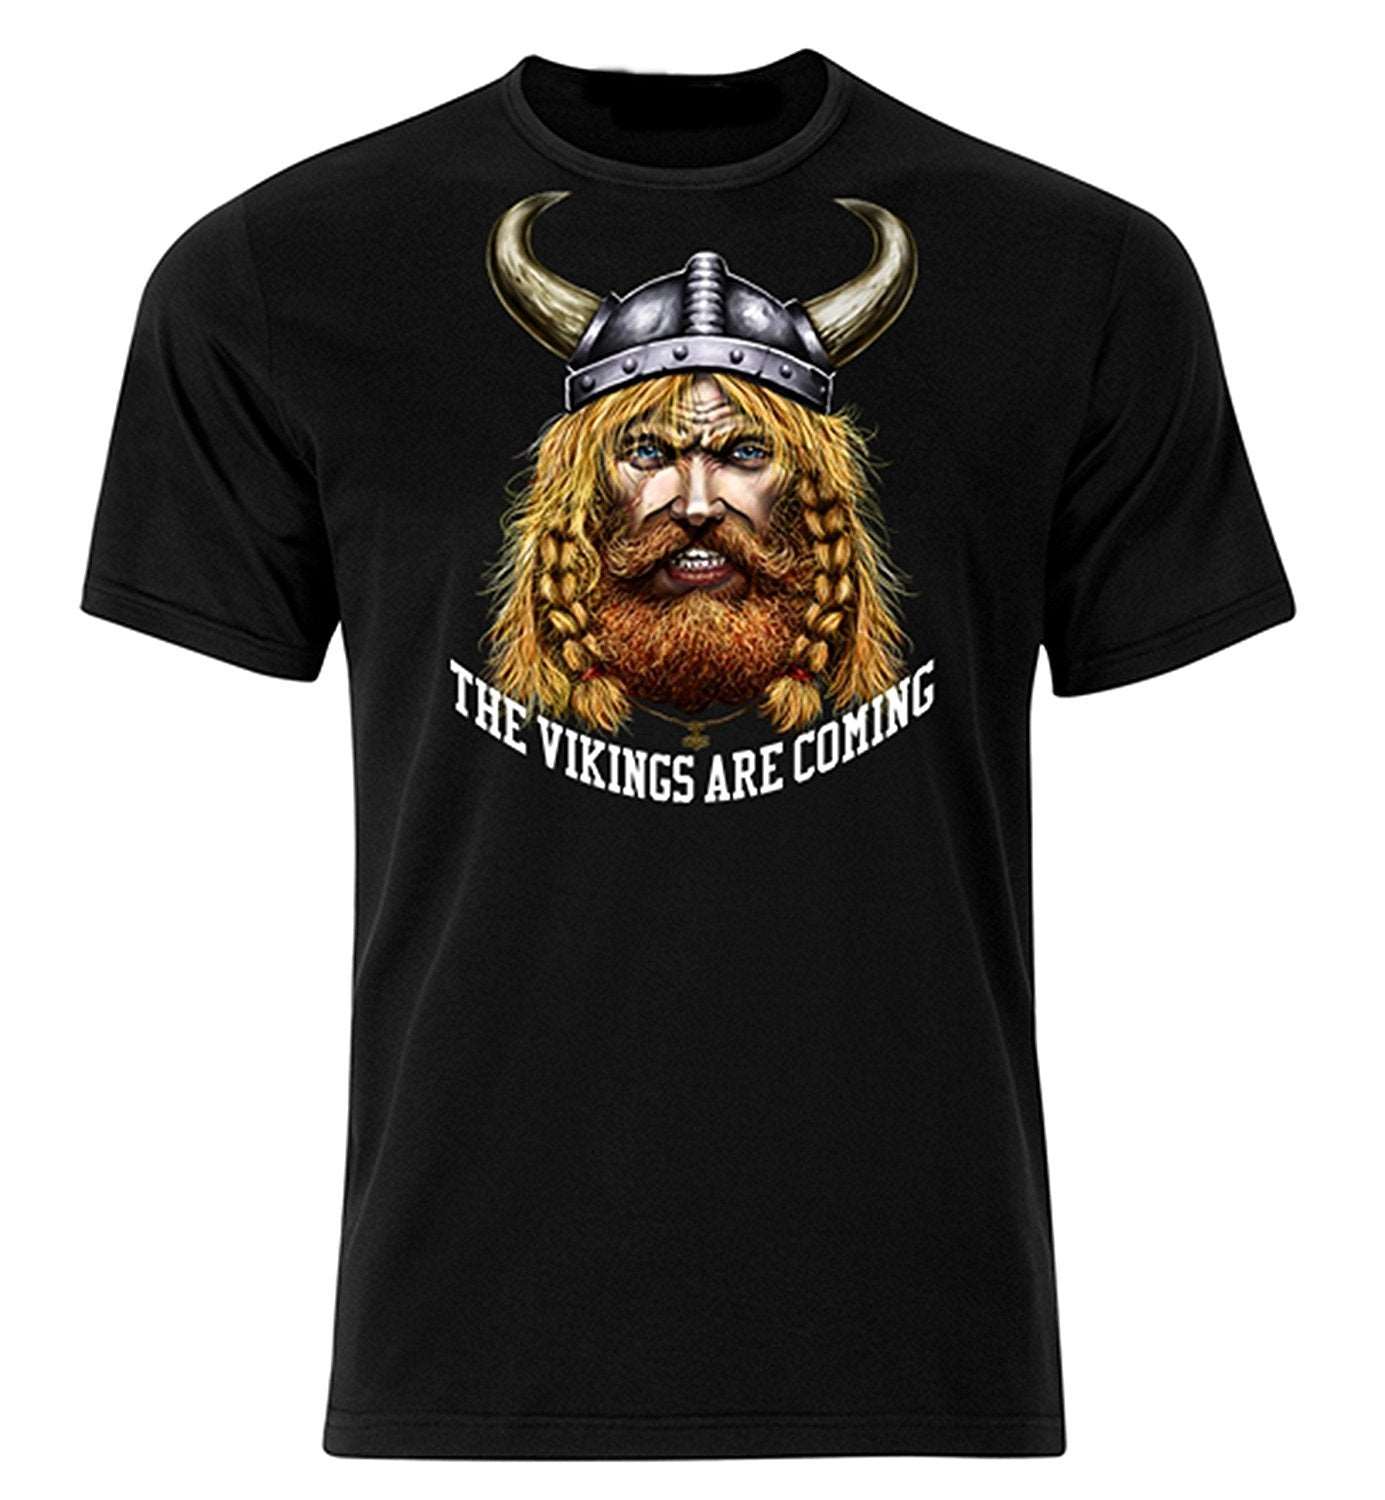 Bear Essentials Clothing. The Vikings Are Coming (S, Black) - Army 1157 kit Small / Black Army 1157 Kit Veterans Owned Business